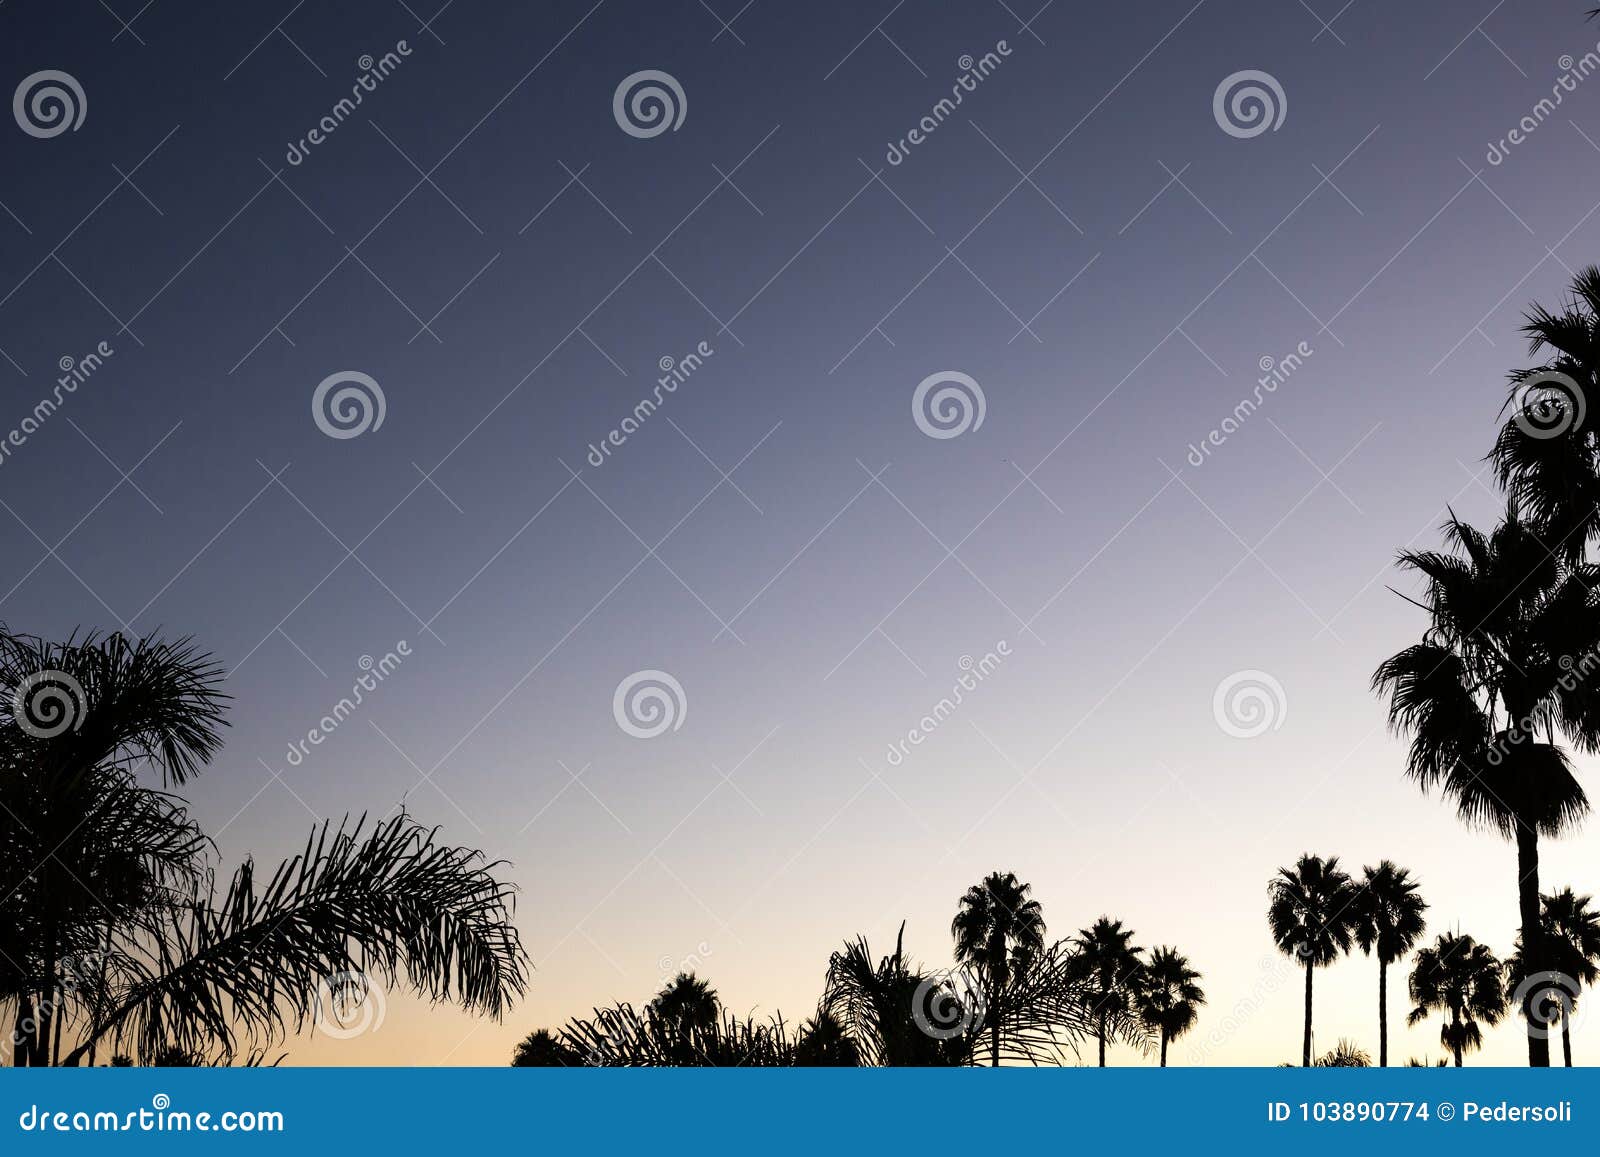 Silhouette Palm Sunset With Red And Dark Violet Sky And Palm Tree Stock